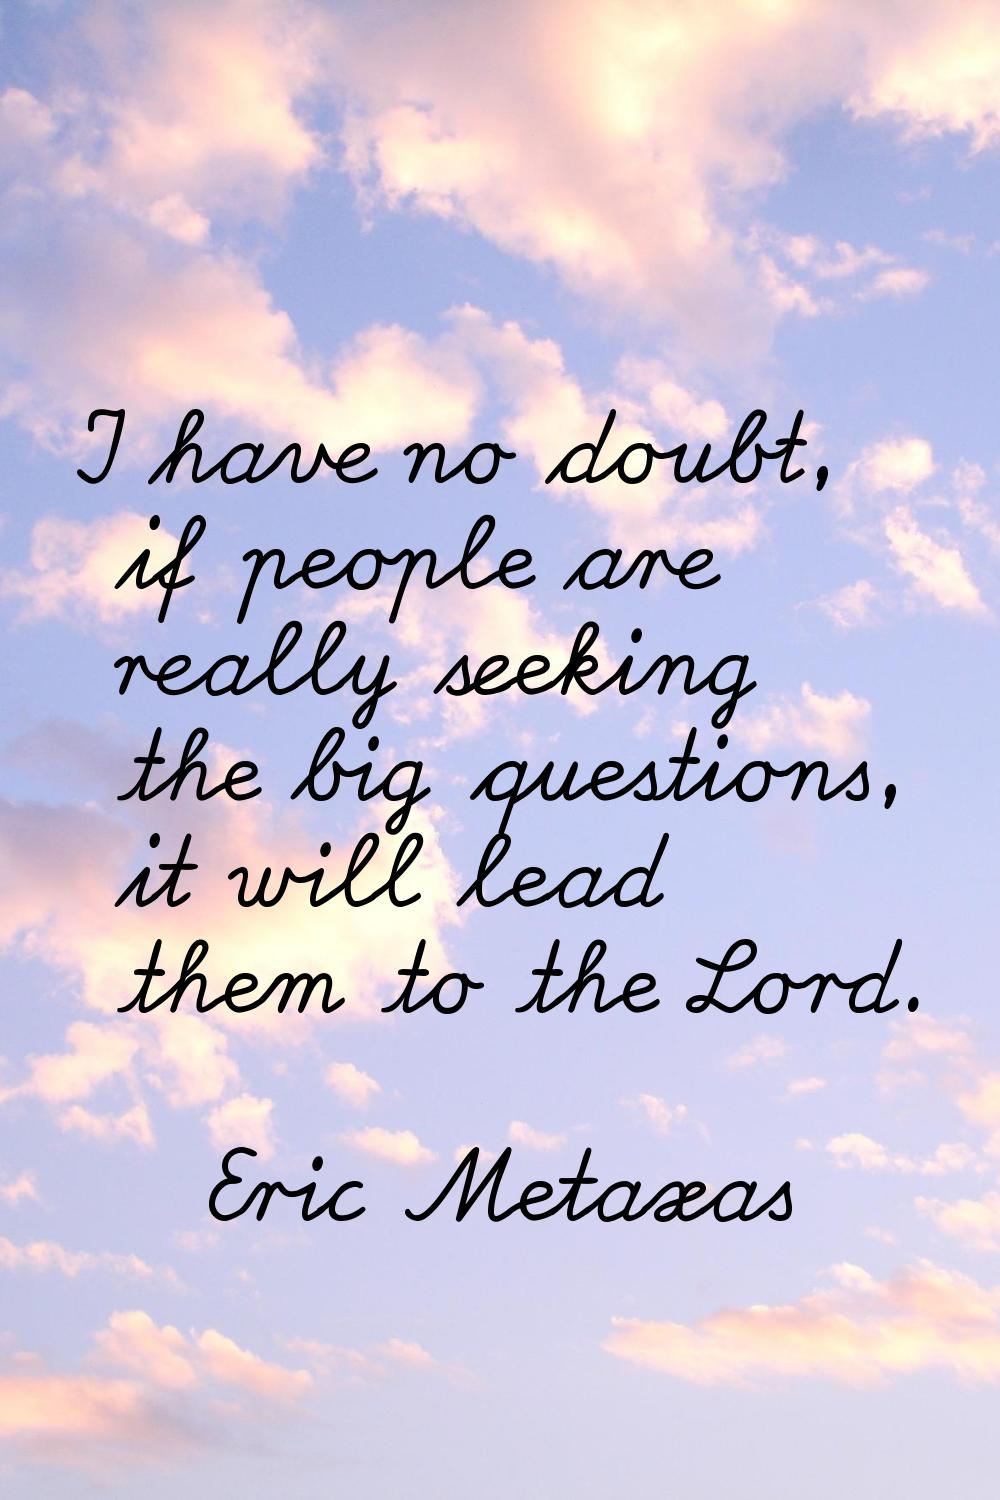 I have no doubt, if people are really seeking the big questions, it will lead them to the Lord.